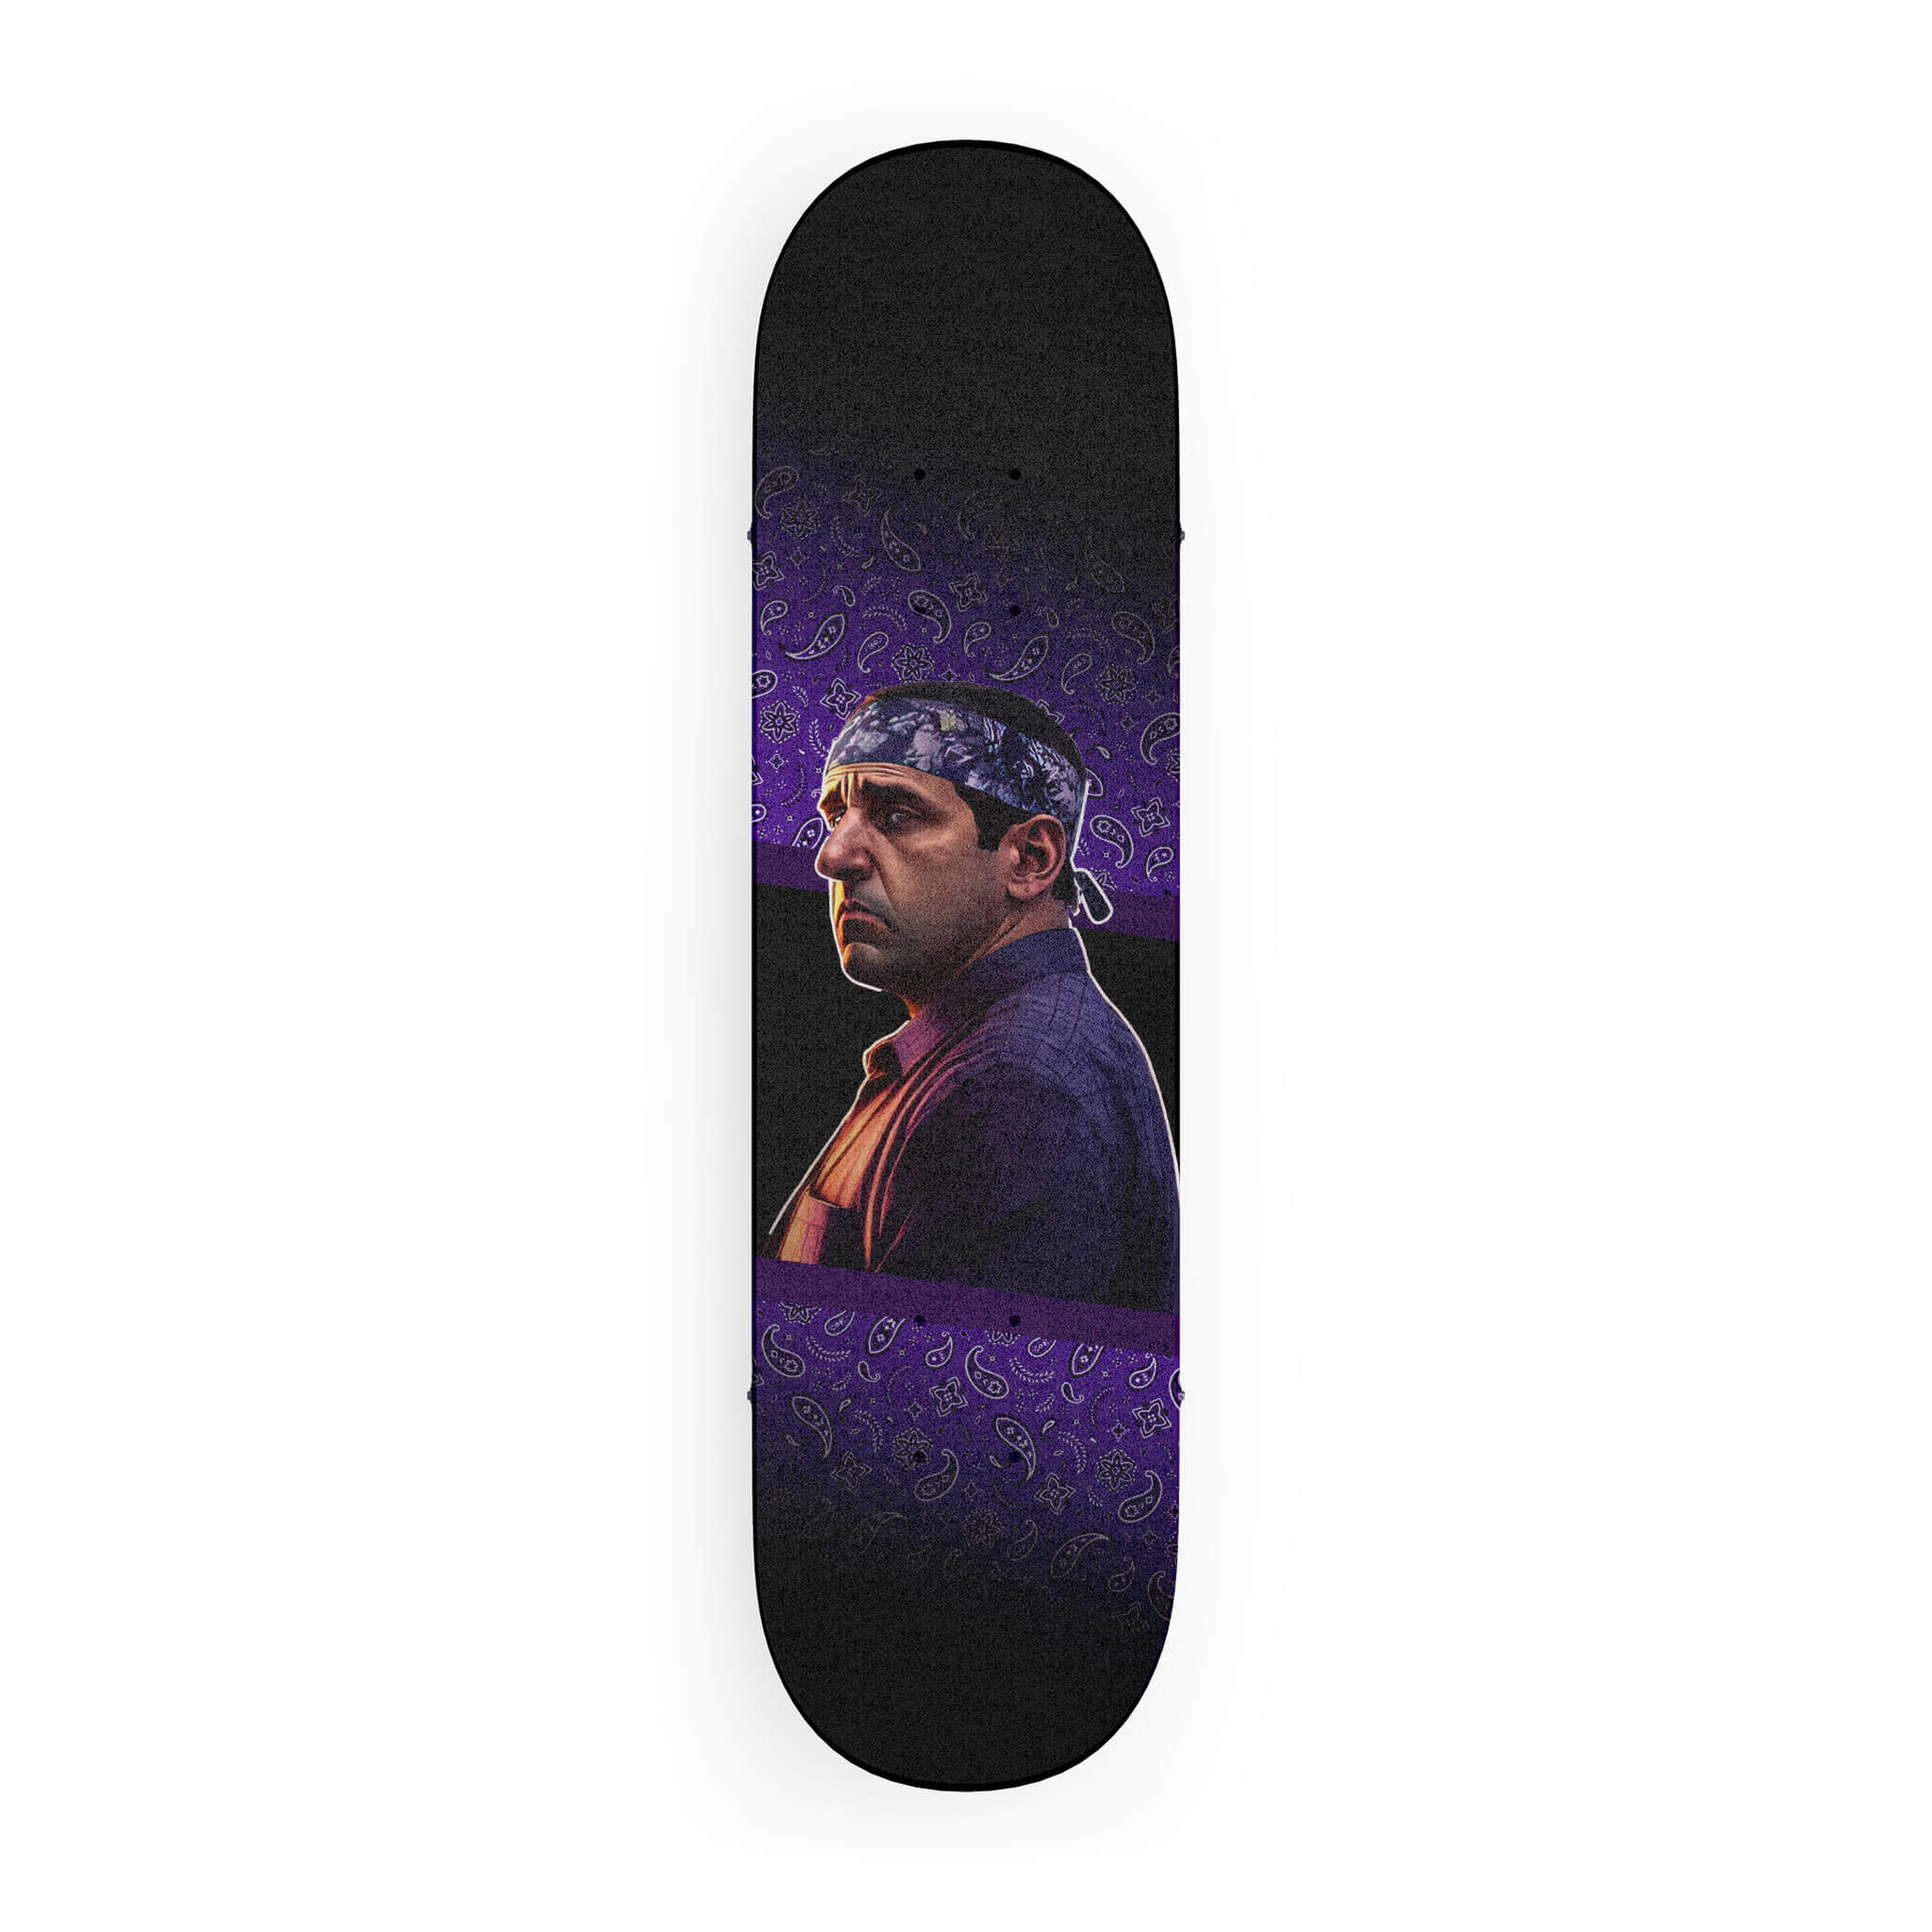 High-quality Skateboard Grip tape with the humorous Prison Mike graphic from The Office in purple shades.